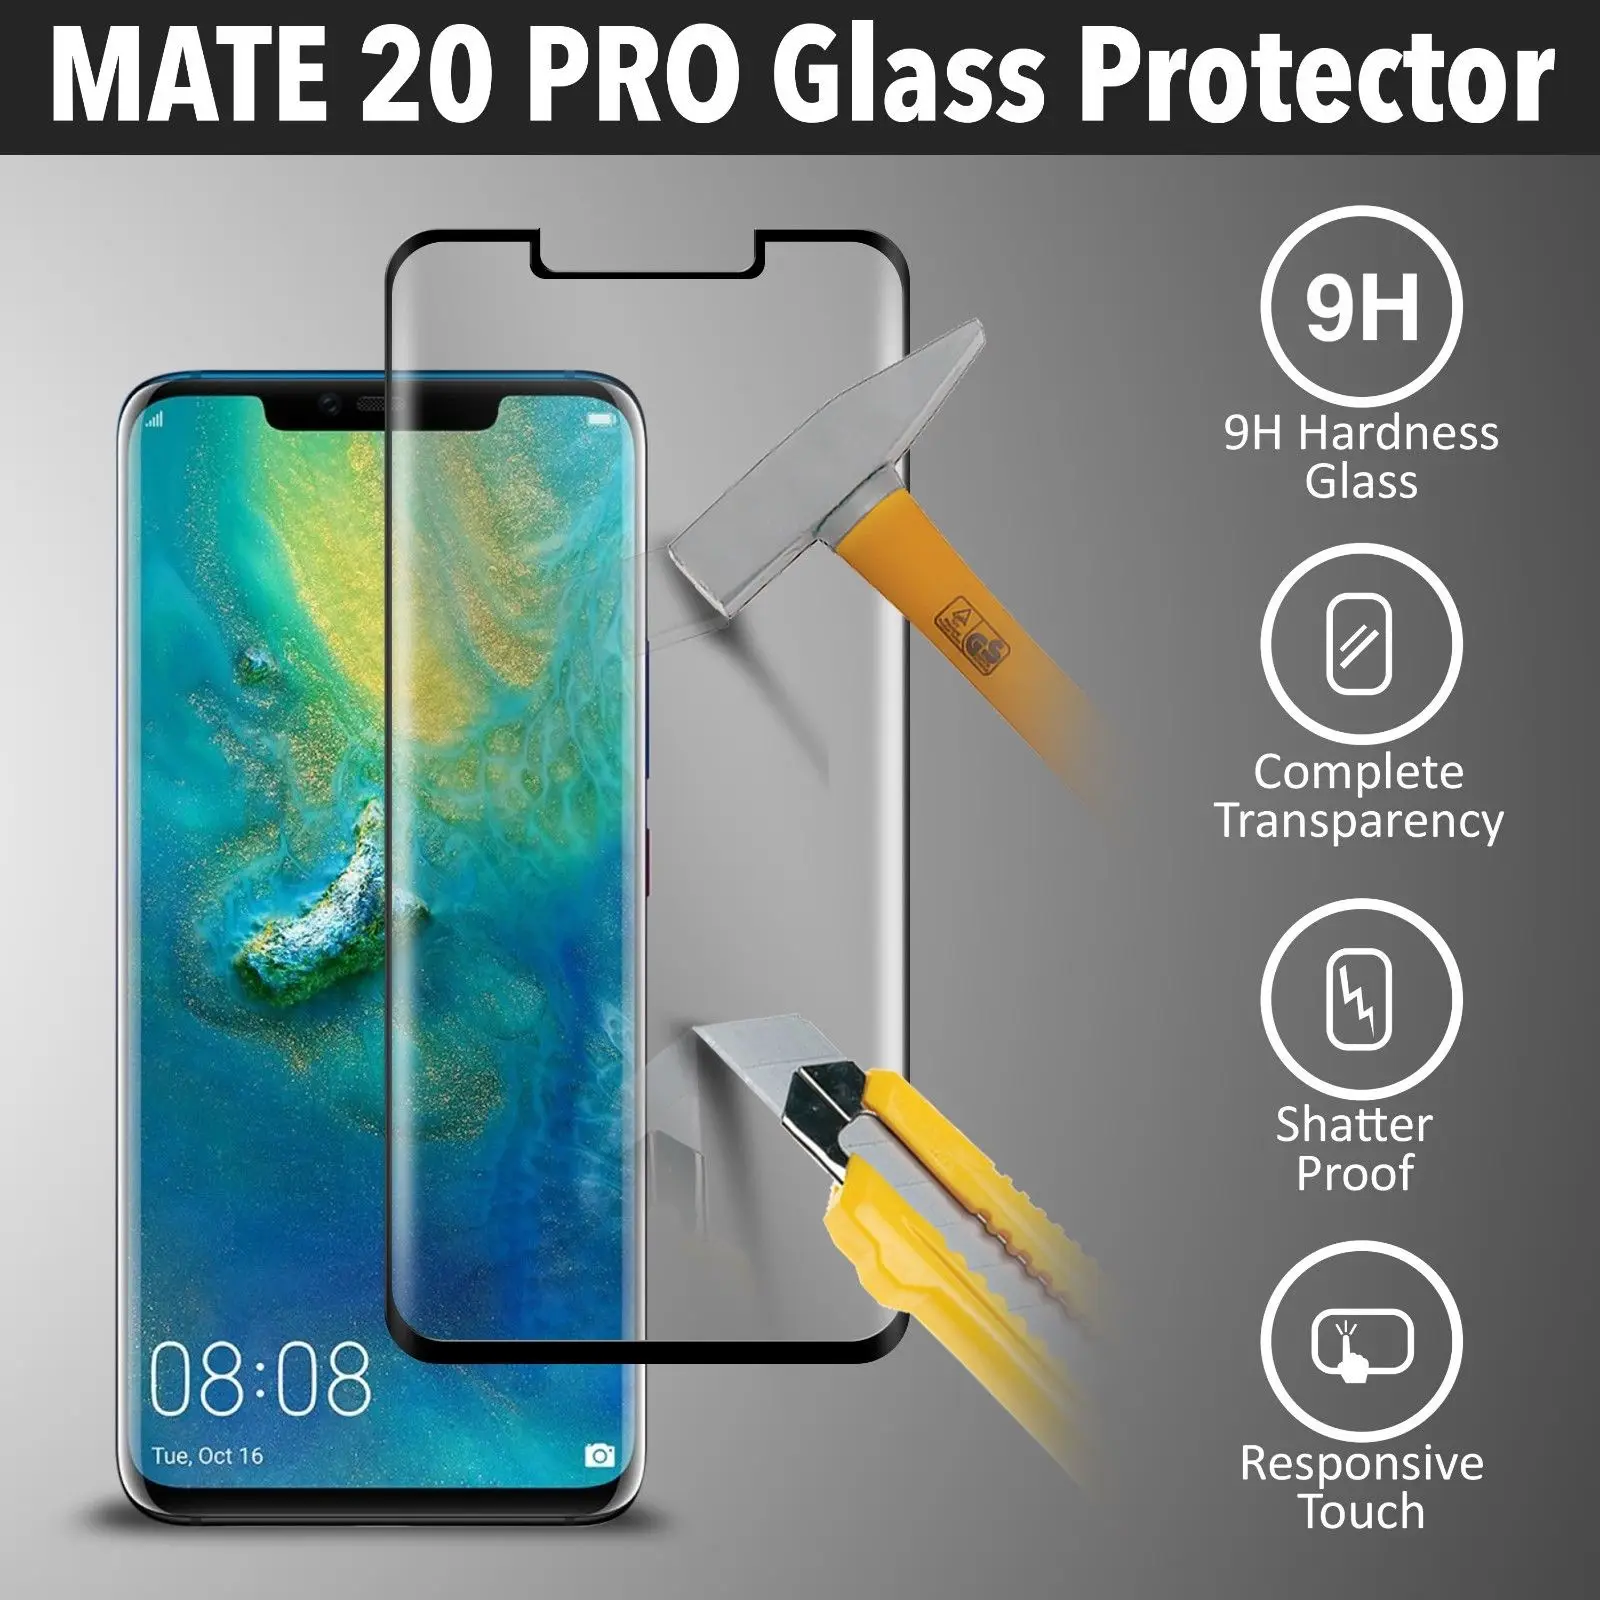 

Anti Scratch 5D Curved 9H clear Tempered Glass Film Screen Protector For Huawei Mate 20 Pro, Transparency 99% color